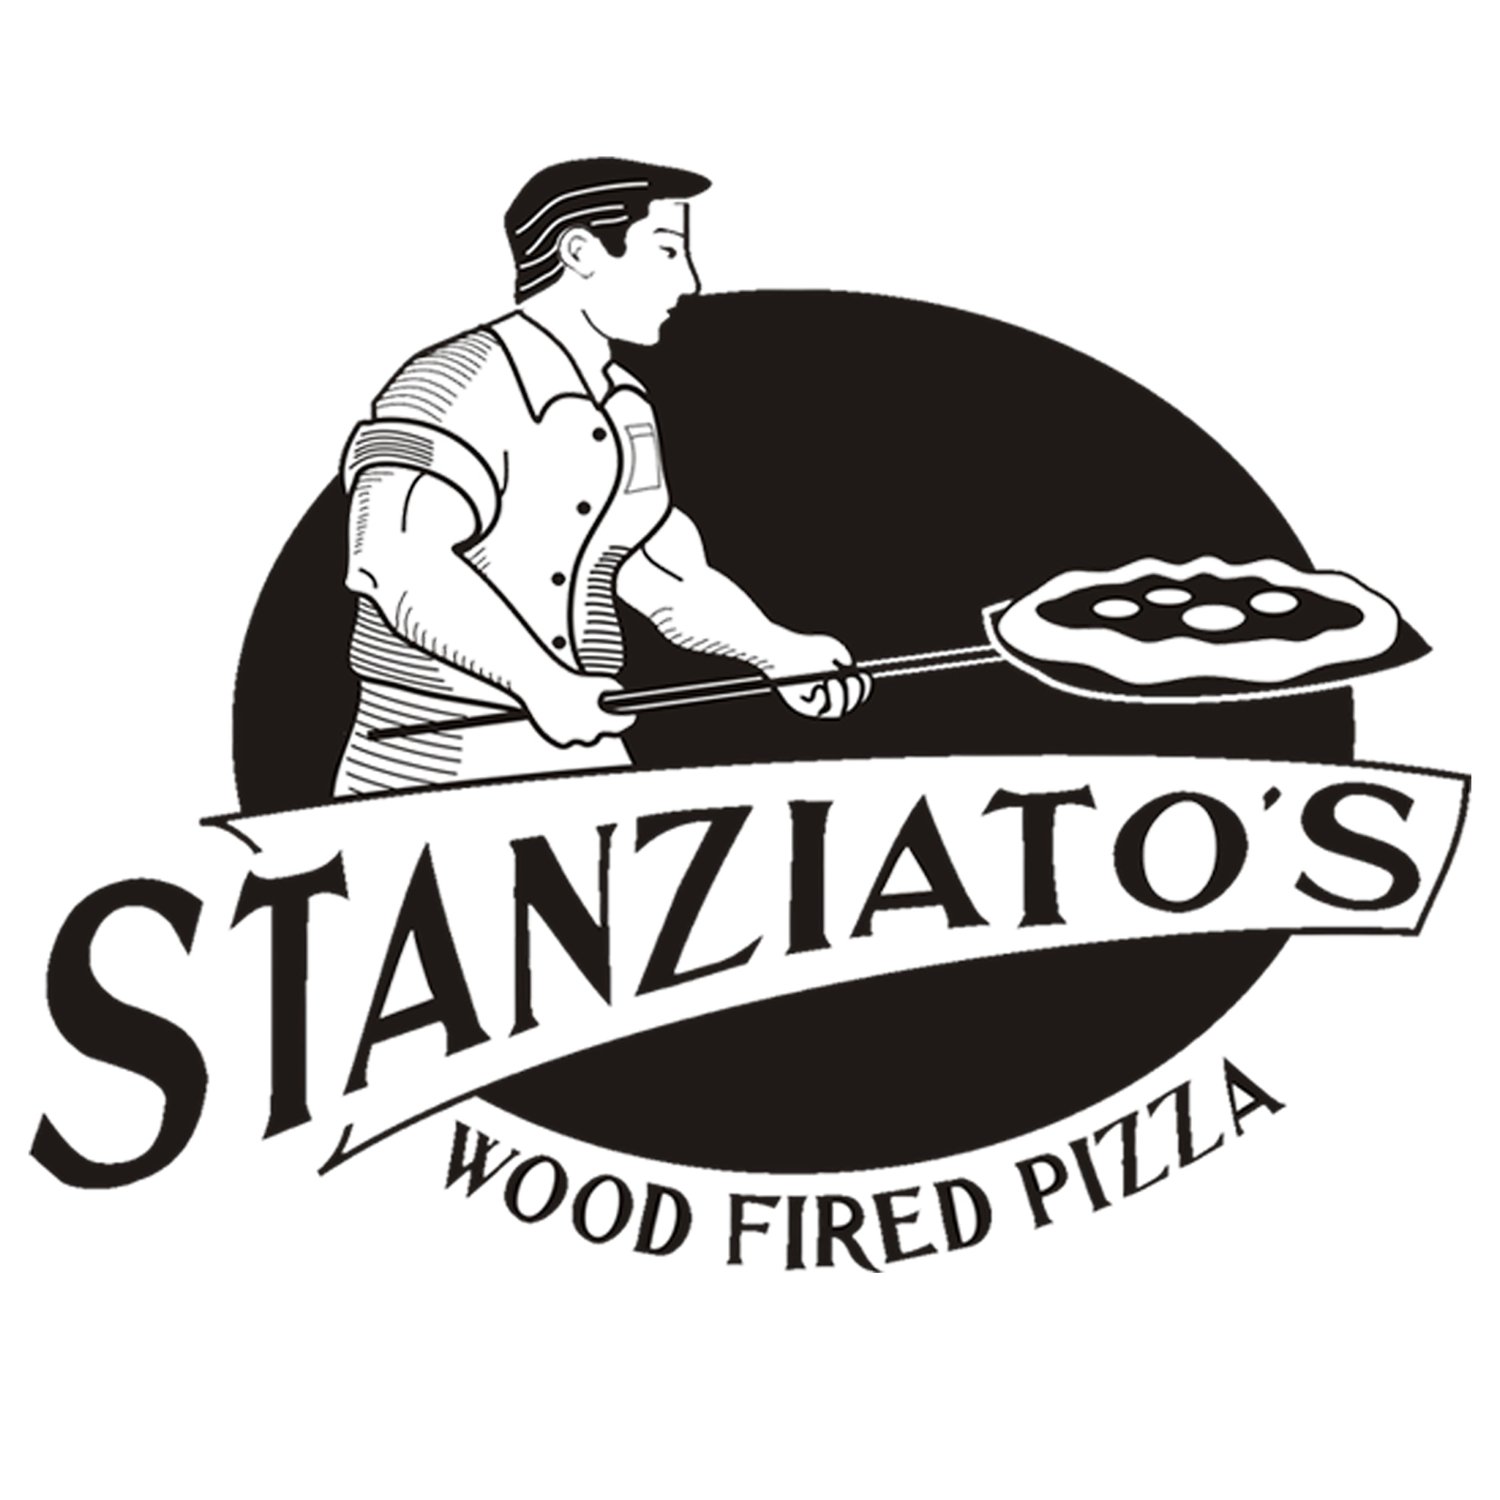 A glimpse into the artisanal excellence of Stanziato's Wood Fired Pizza, where dough, unique toppings, and the magic of a wood-fired oven come together.